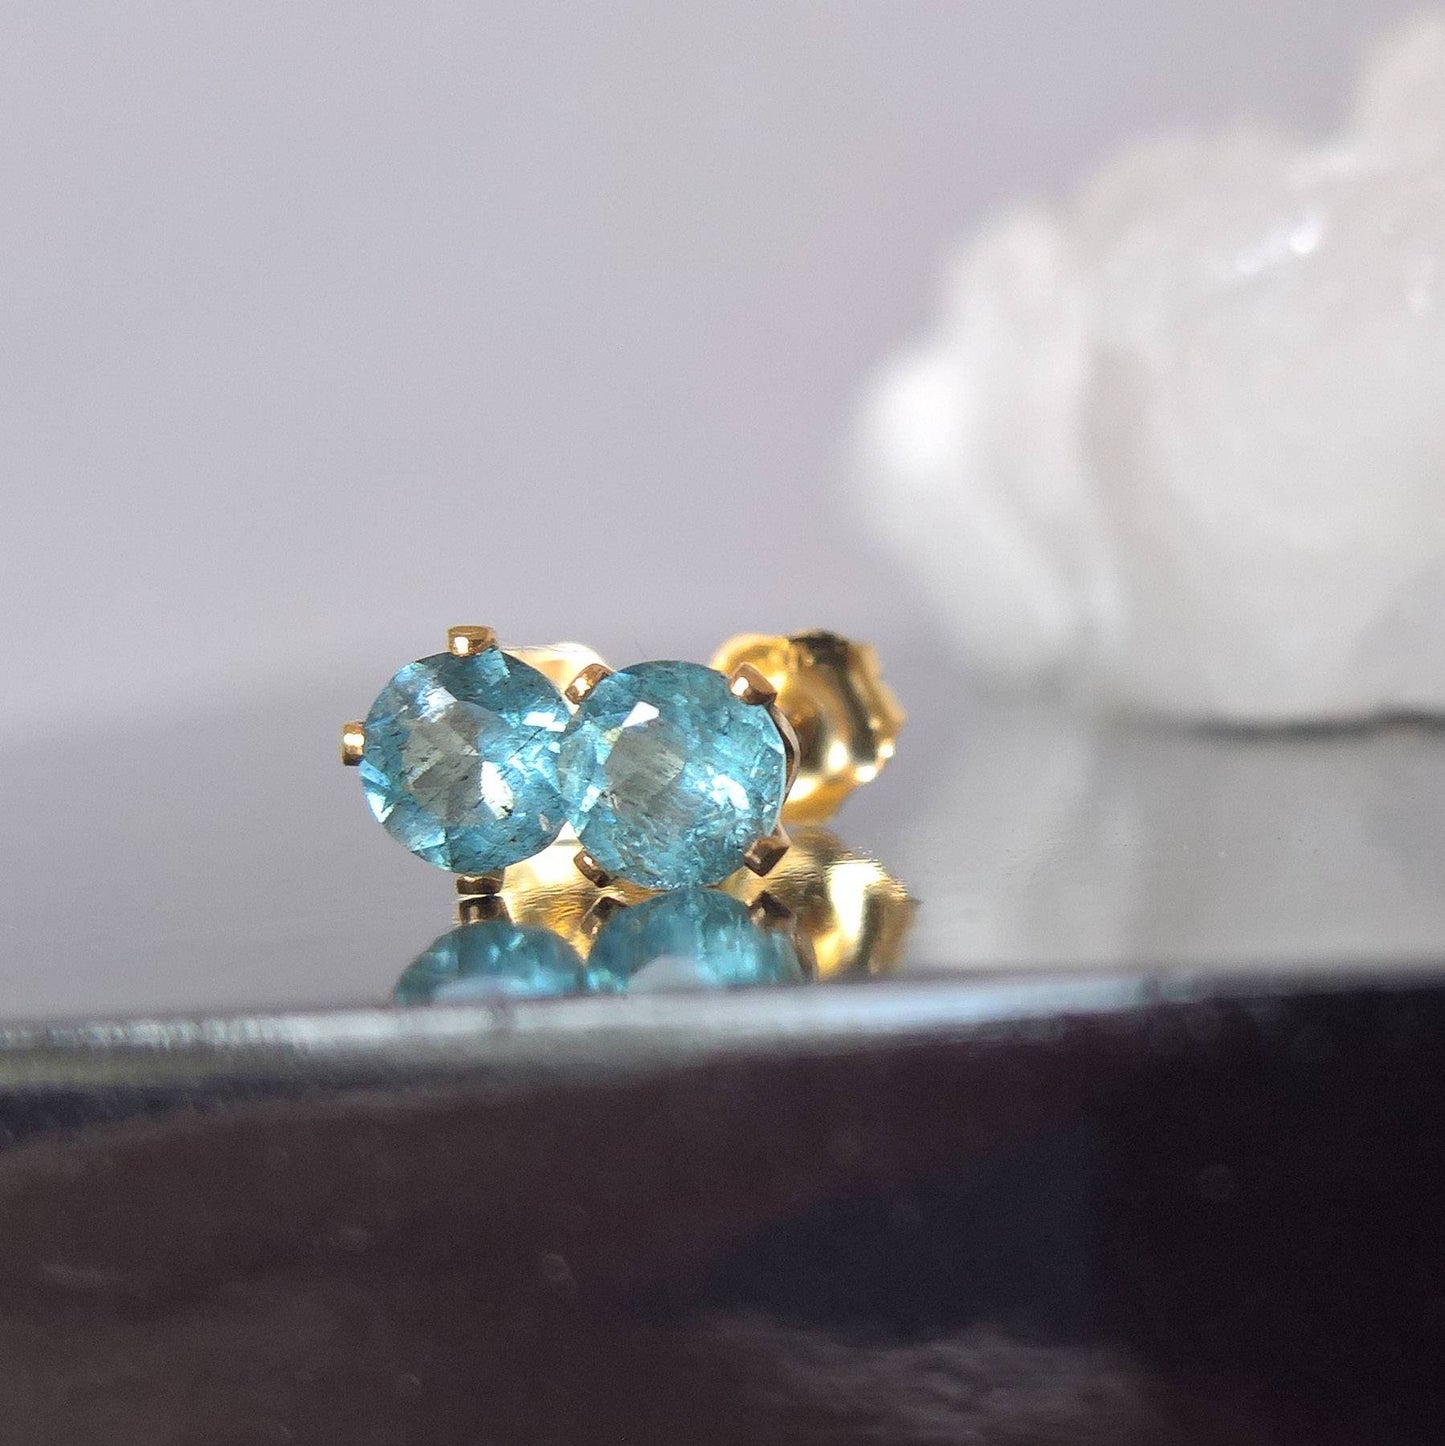 Moss Aquamarine earrings studs - gold fill or sterling silver 4mm size